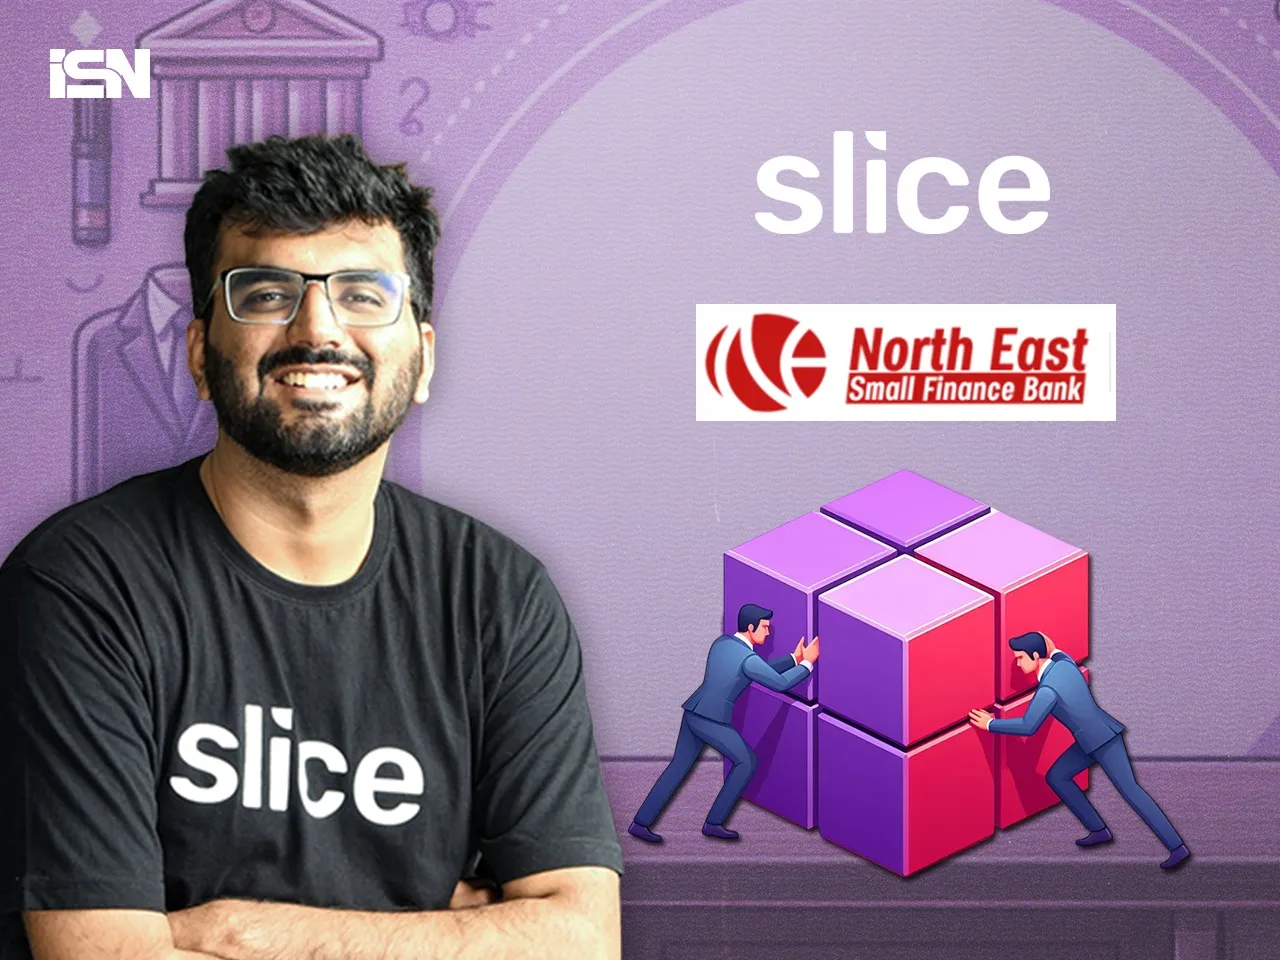 CCI approves fintech unicorn slice's merger with North East SFB